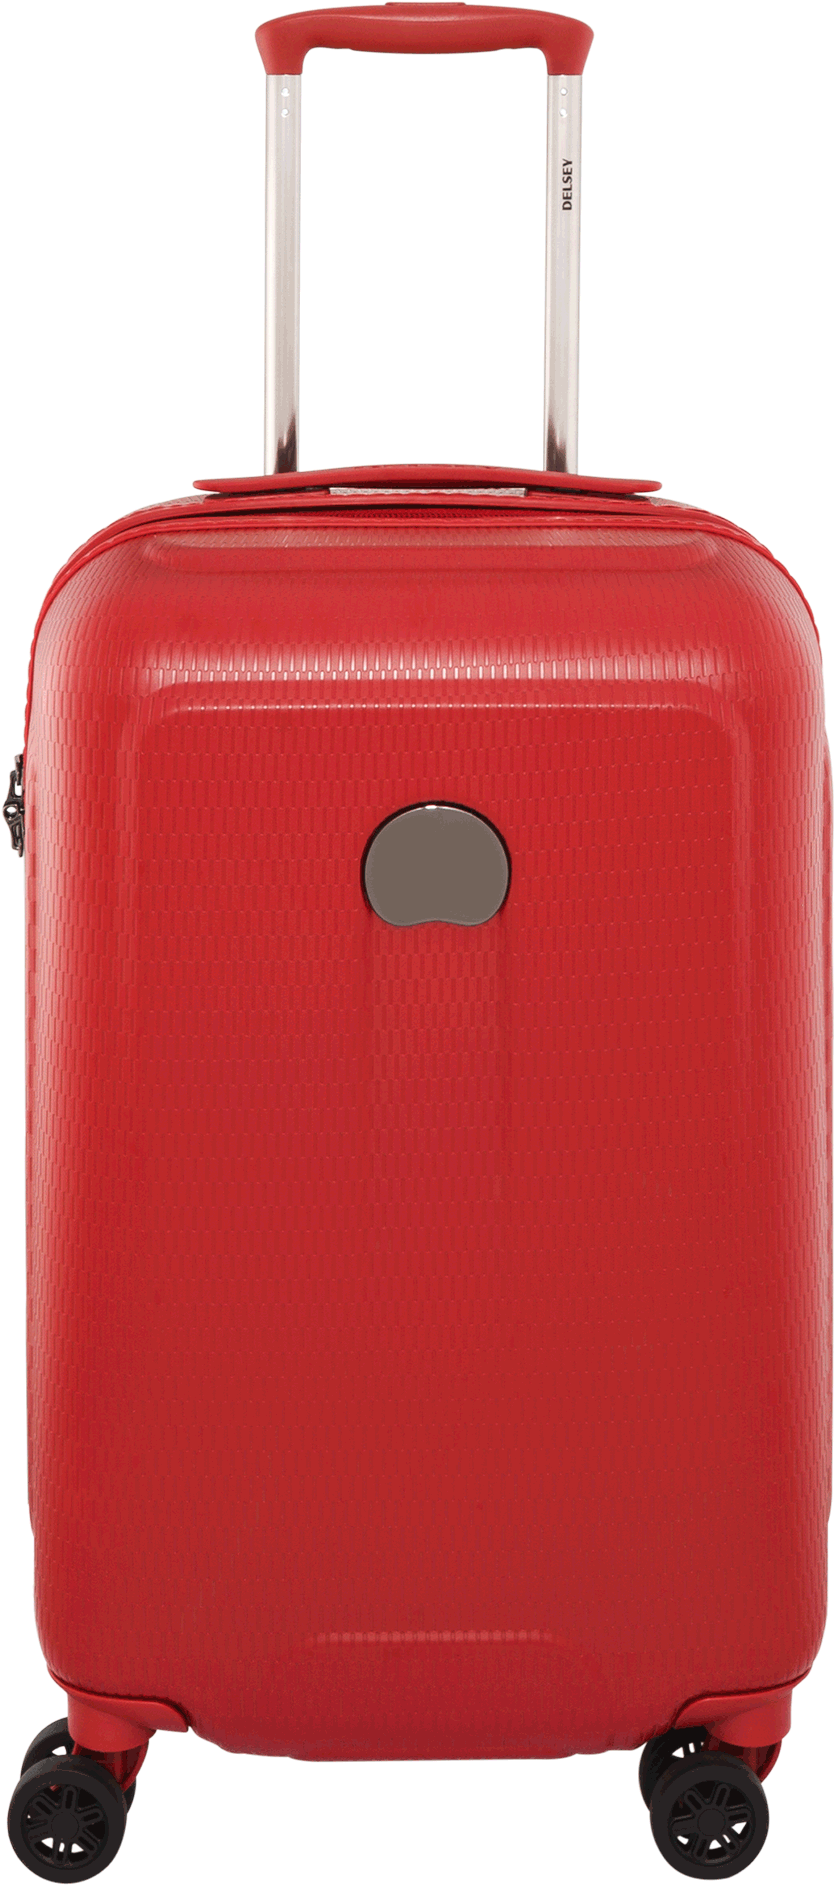 Red Hardshell Carry On Luggage